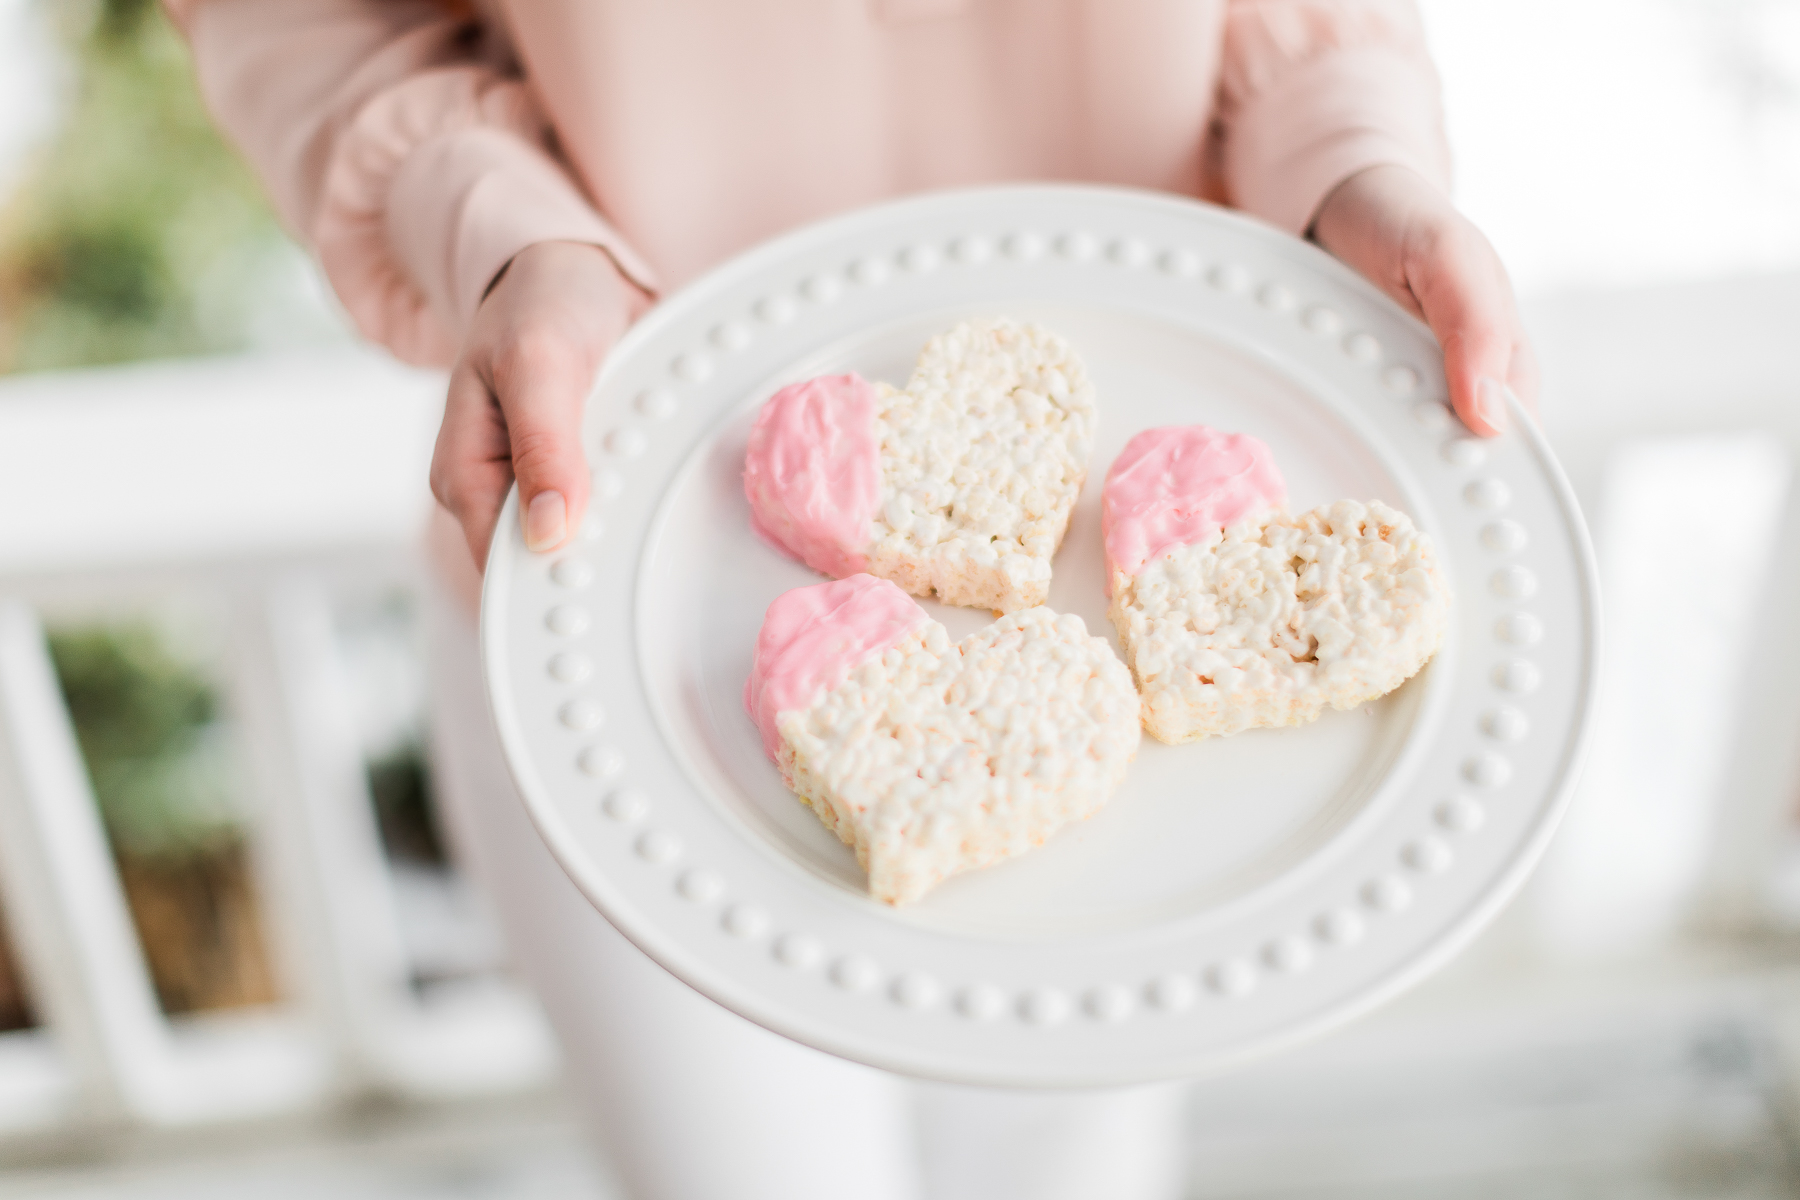 Valentines rice krispie treats recipe by southern lifestyle blogger Stephanie Ziajka of Diary of a Debutante